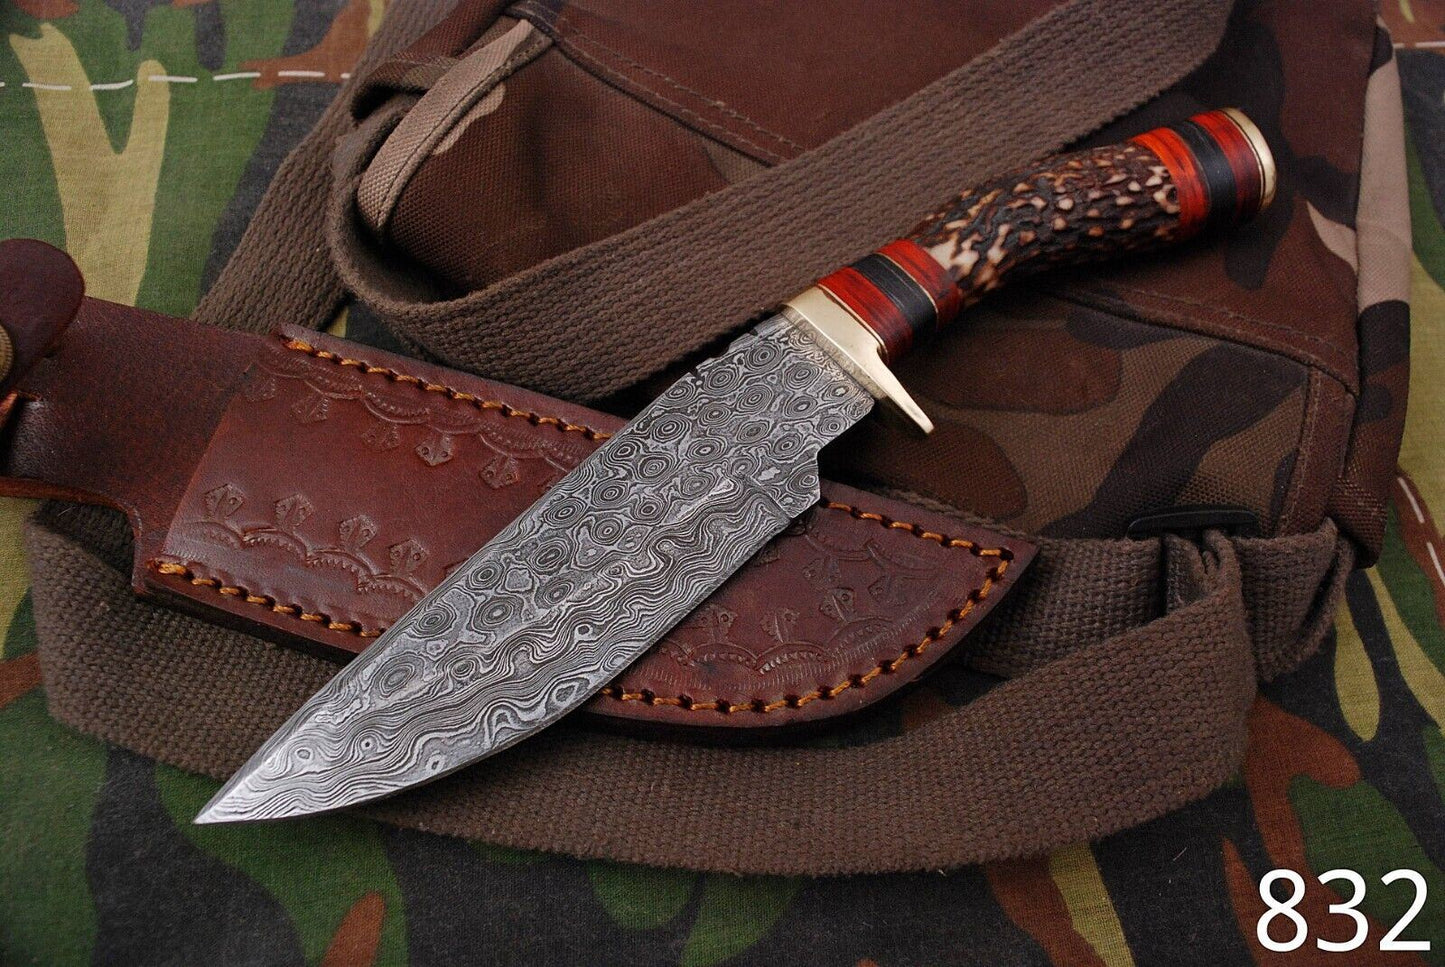 SHARDBLADE 10" HAND FORGED DAMASCUS Steel Hunting Knife Stag/Antler Brass Guard